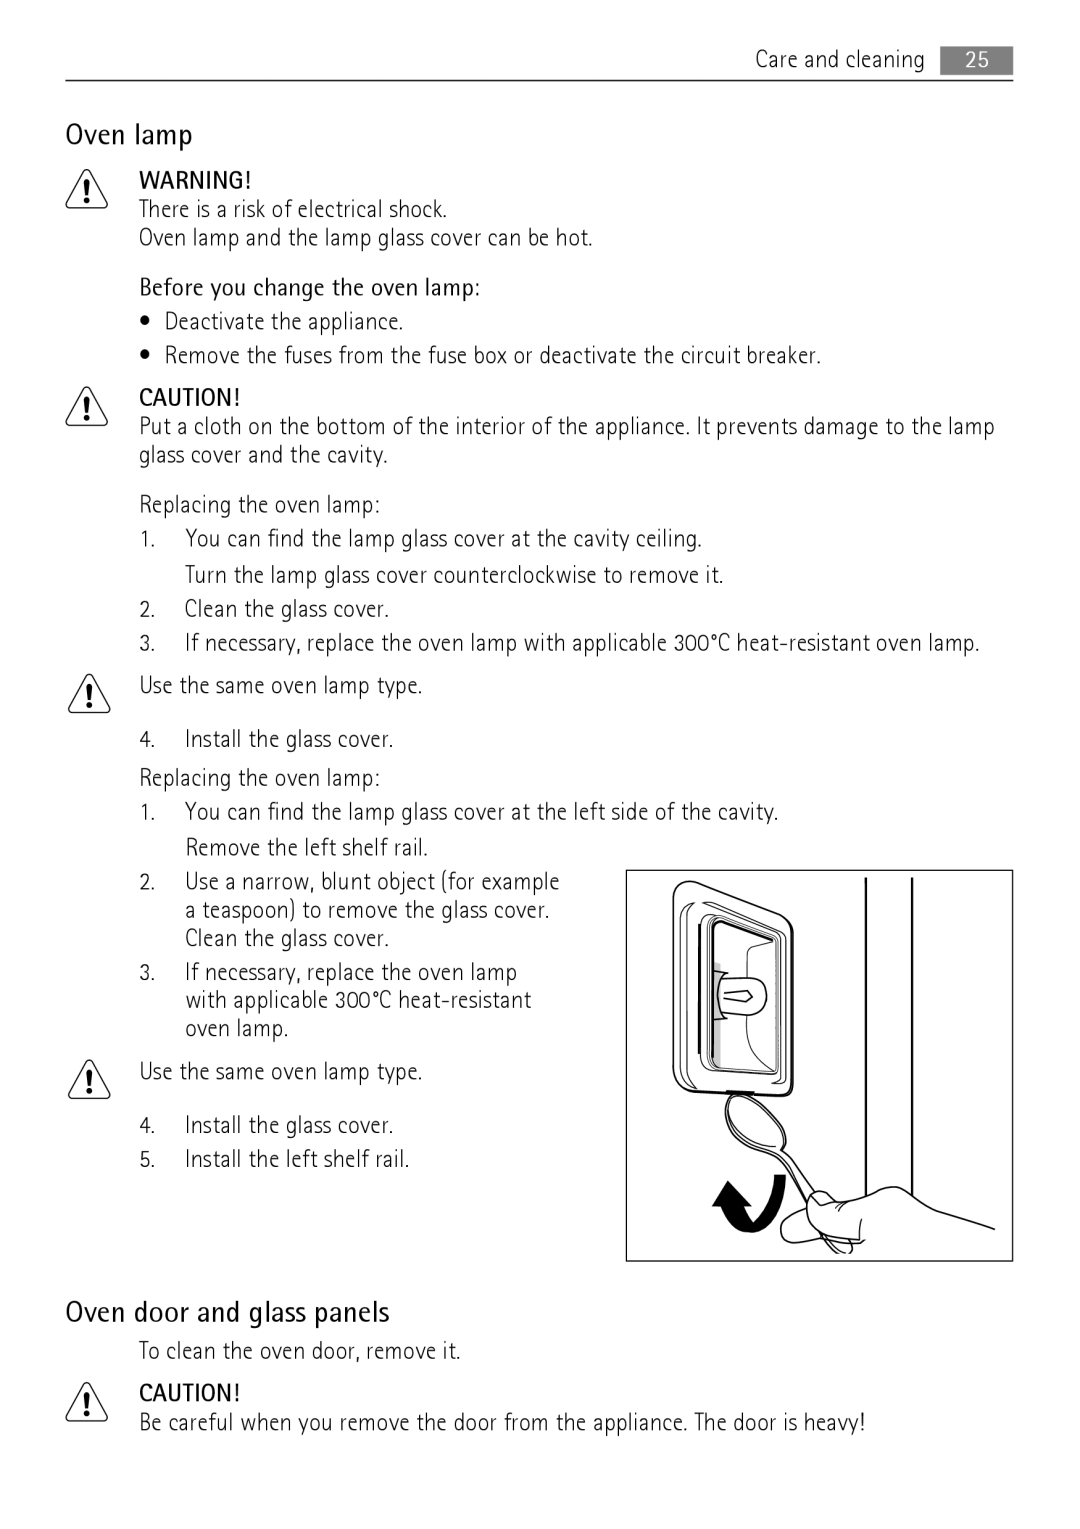 AEG BE7314401 user manual Oven lamp, Oven door and glass panels 